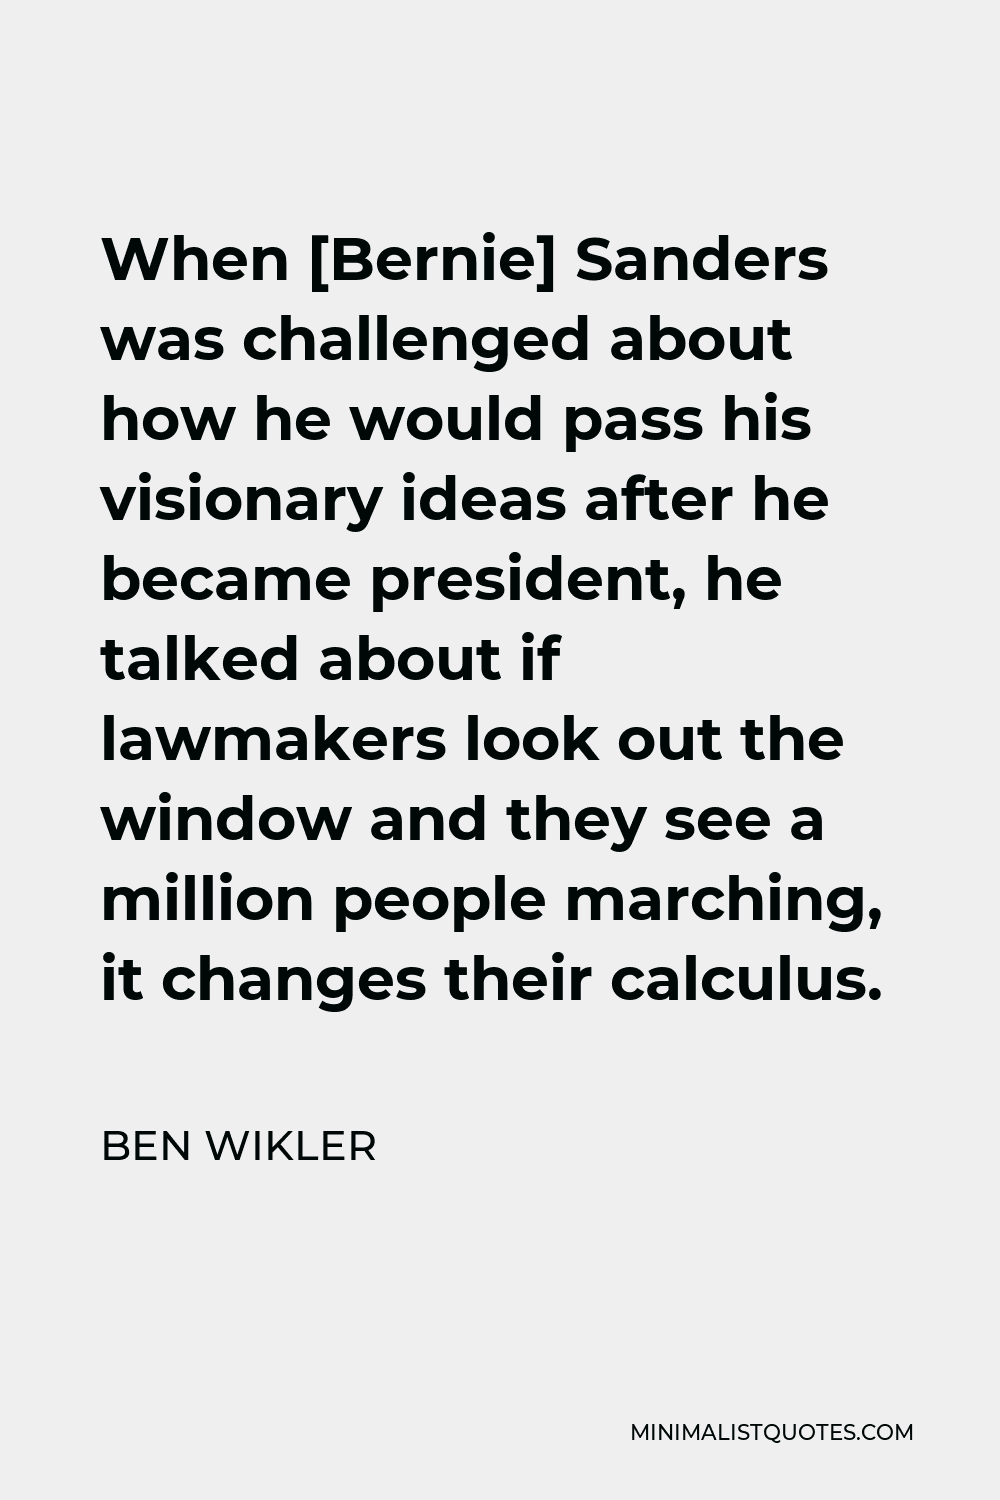 Ben Wikler Quote - When [Bernie] Sanders was challenged about how he would pass his visionary ideas after he became president, he talked about if lawmakers look out the window and they see a million people marching, it changes their calculus.